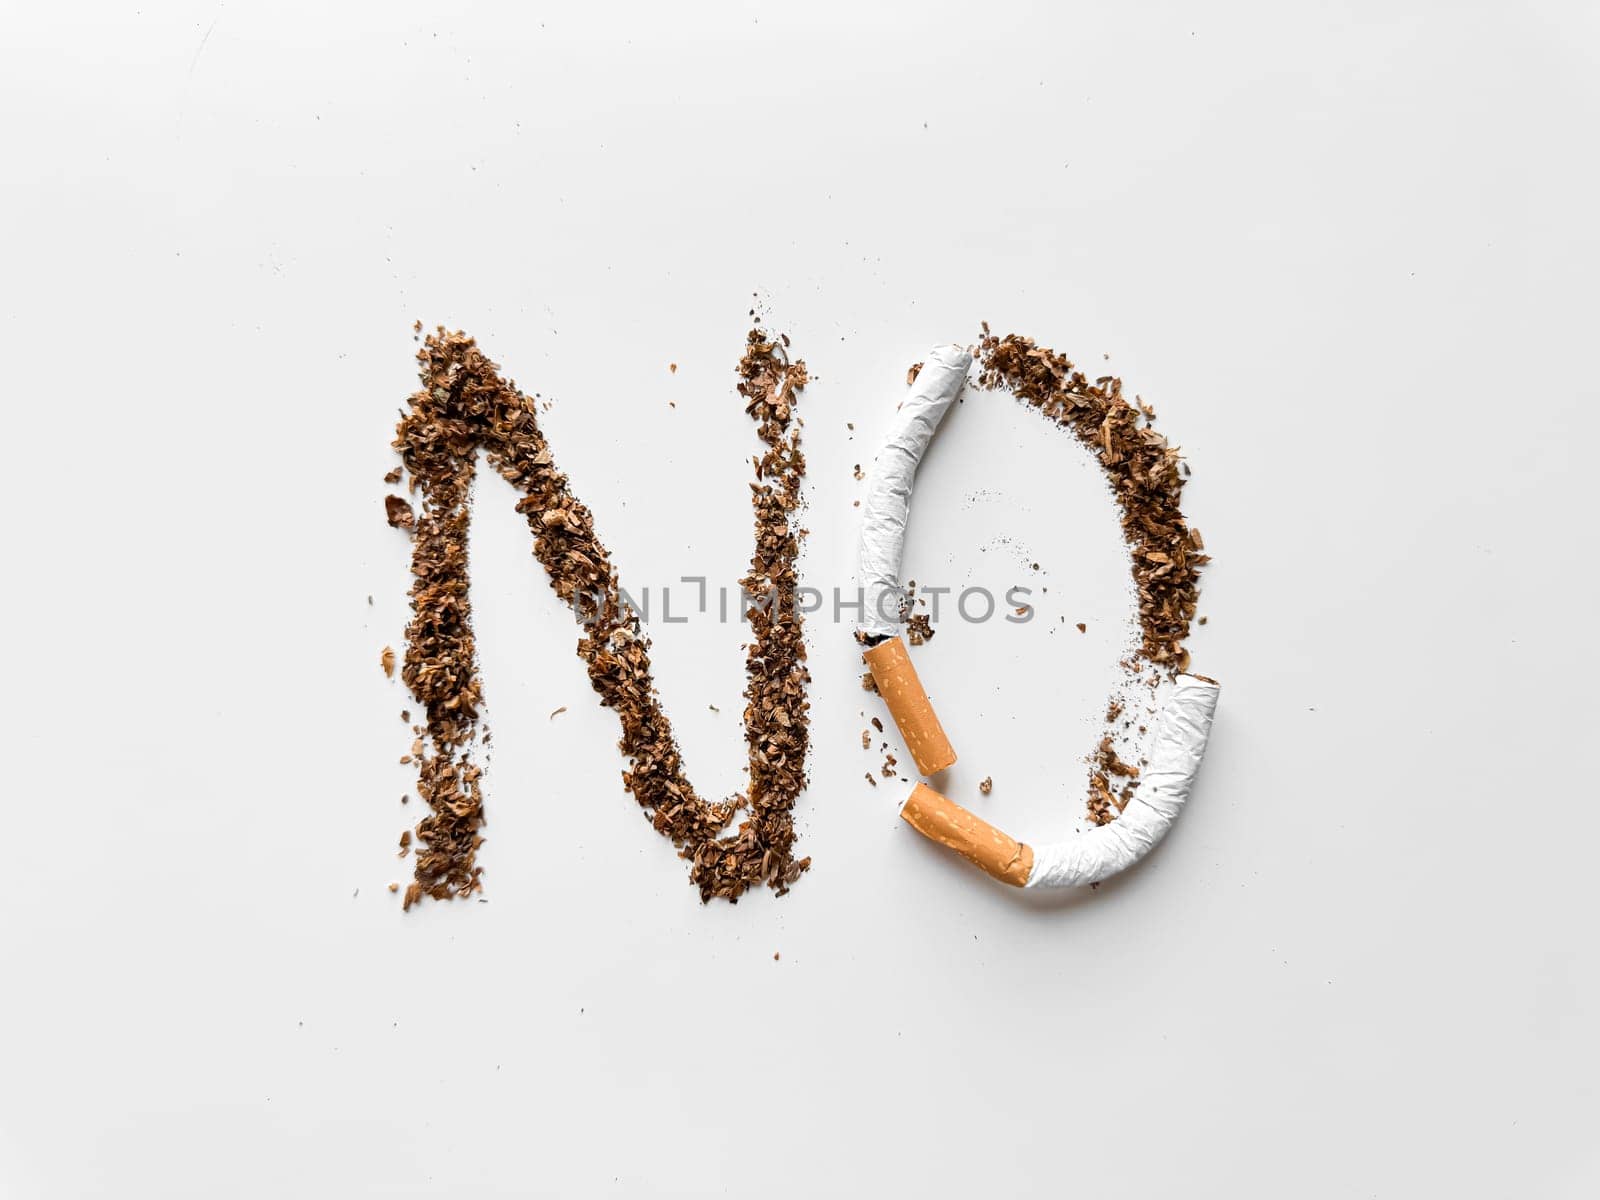 Word 'NO' created with tobacco and broken cigarette on white background for anti smoking and health concept. No tobacco day. High quality photo